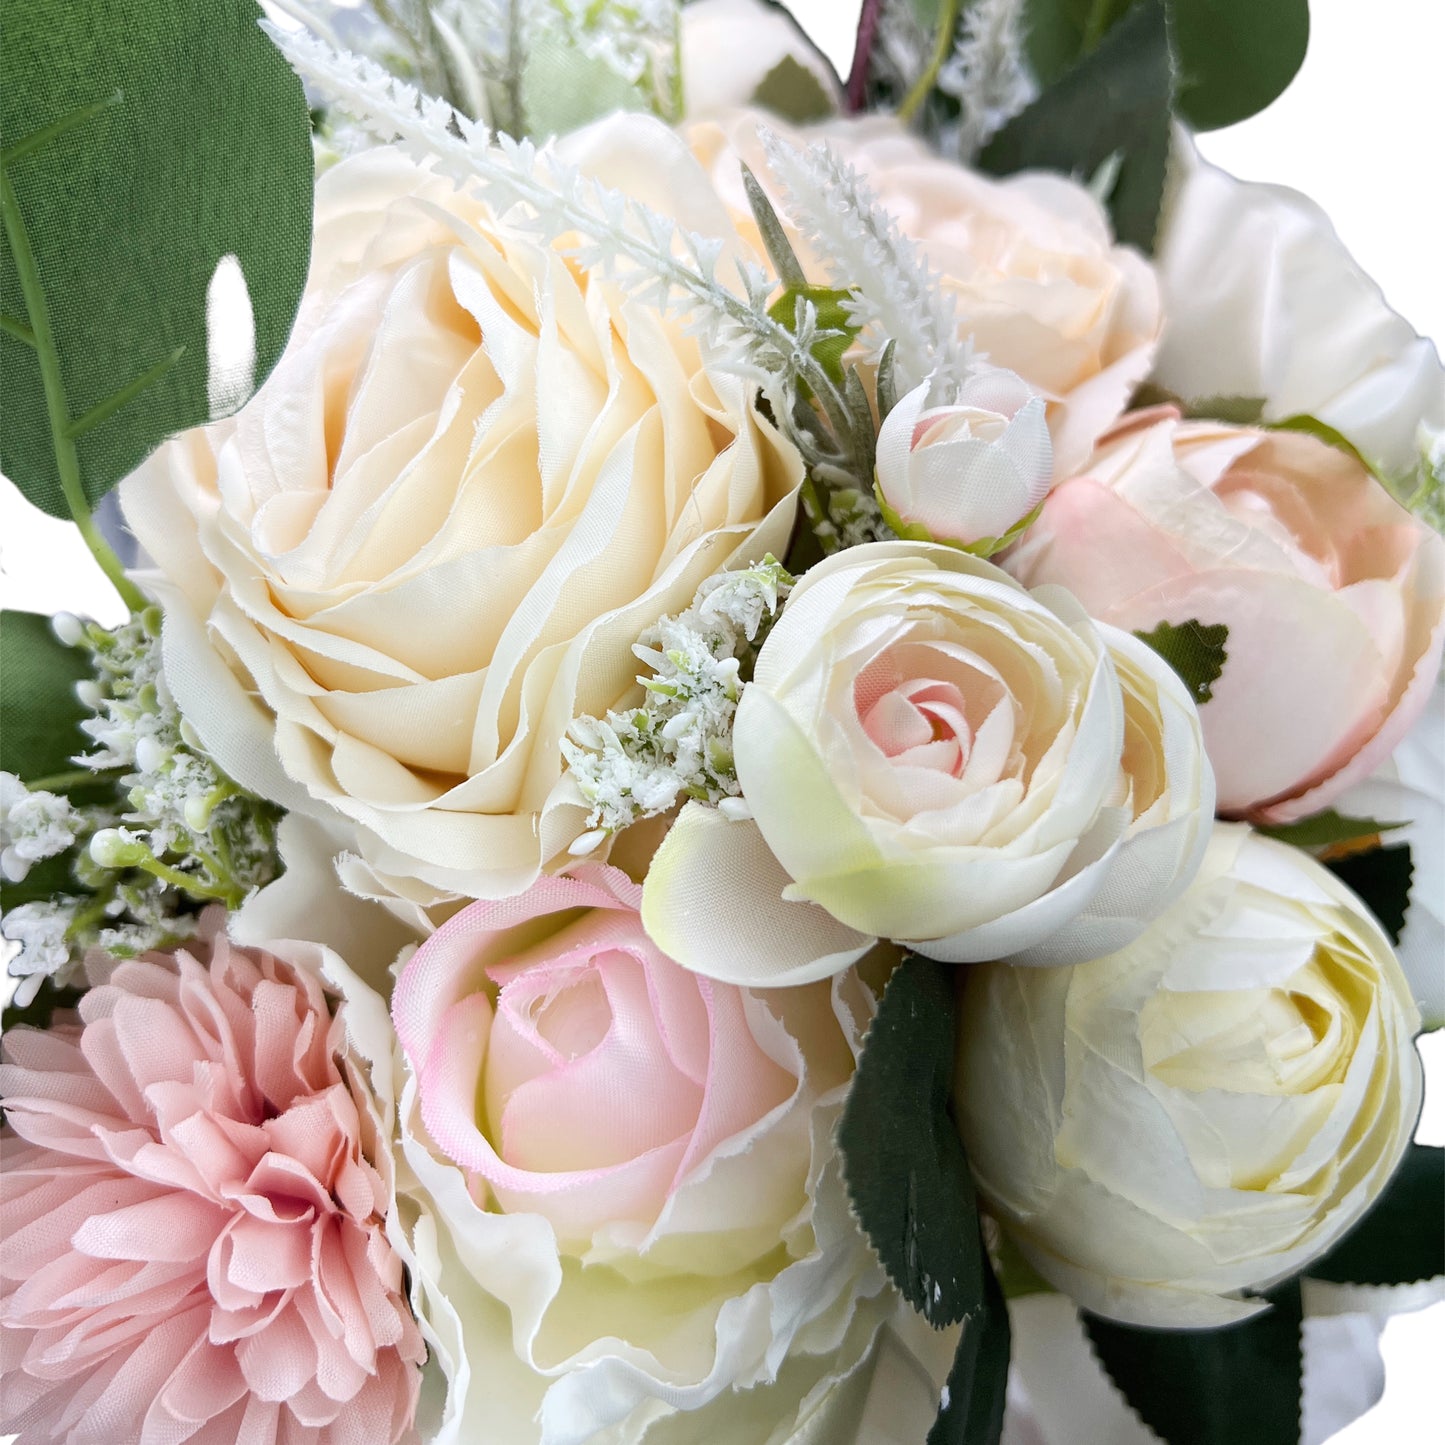 Elegant Artificial Wedding Bouquet with Roses, Peonies, and Eucalyptus for Brides and Bridesmaids